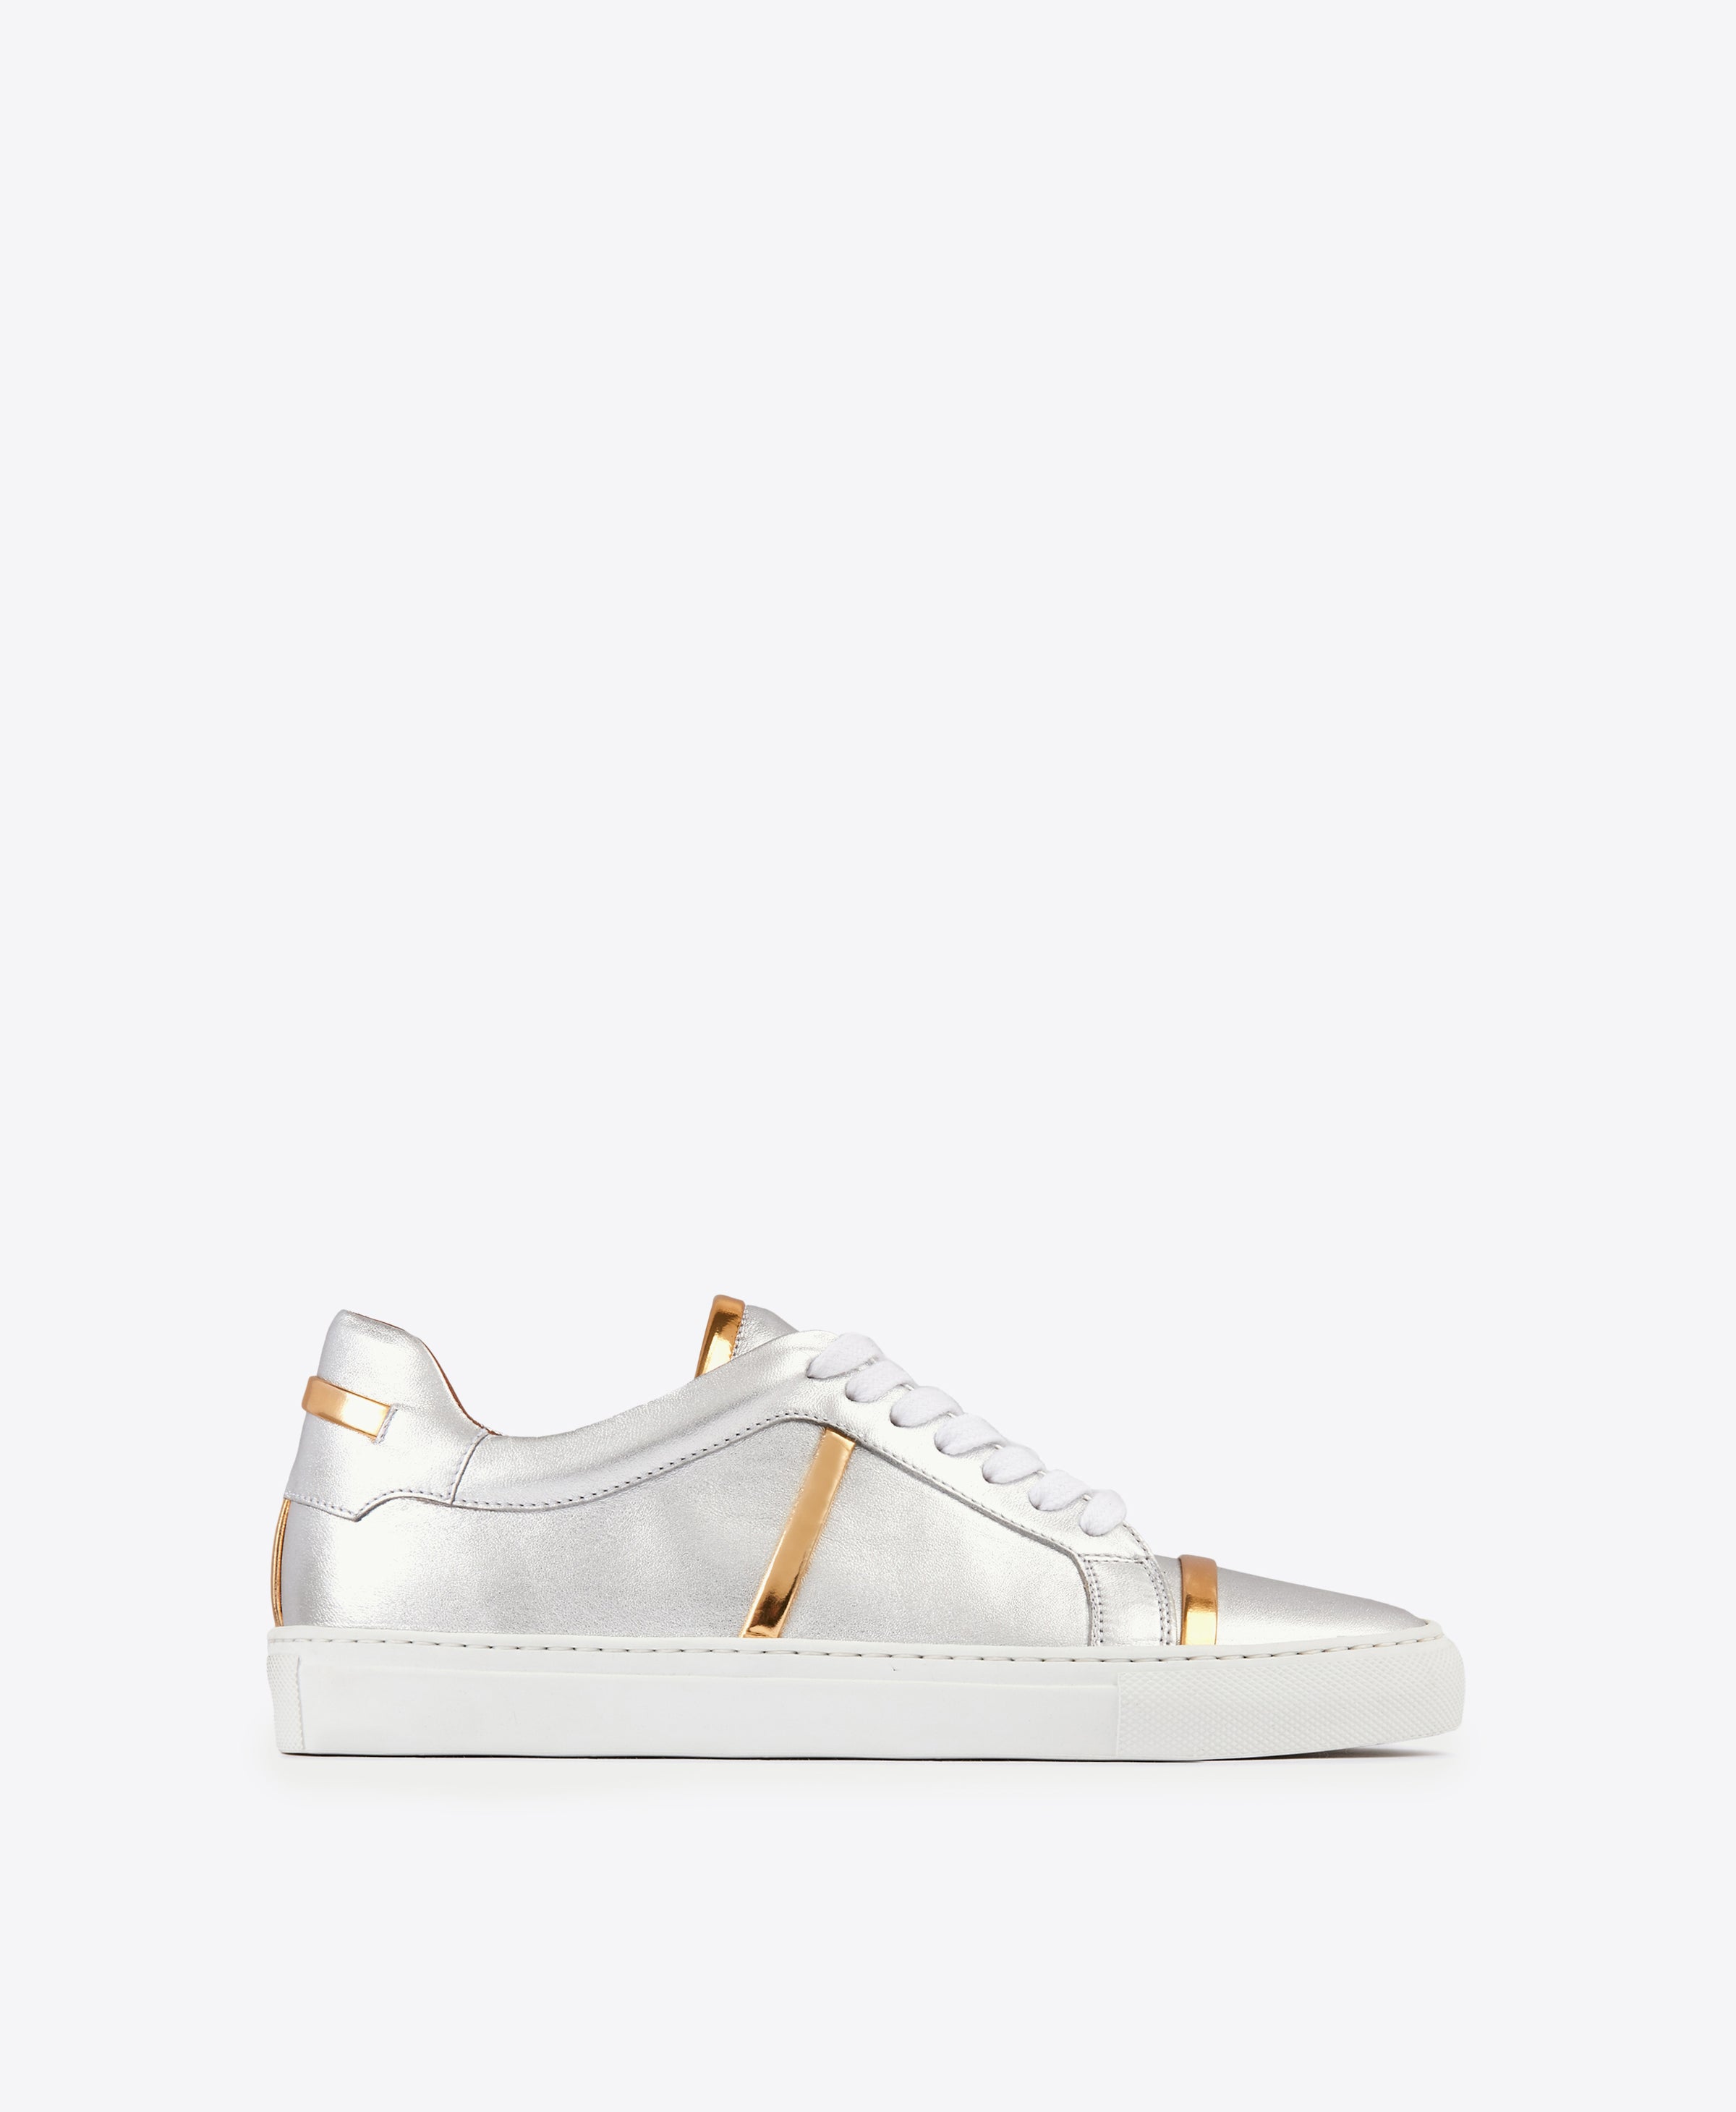 Deon Metallic Silver Leather Sneakers | Malone Souliers